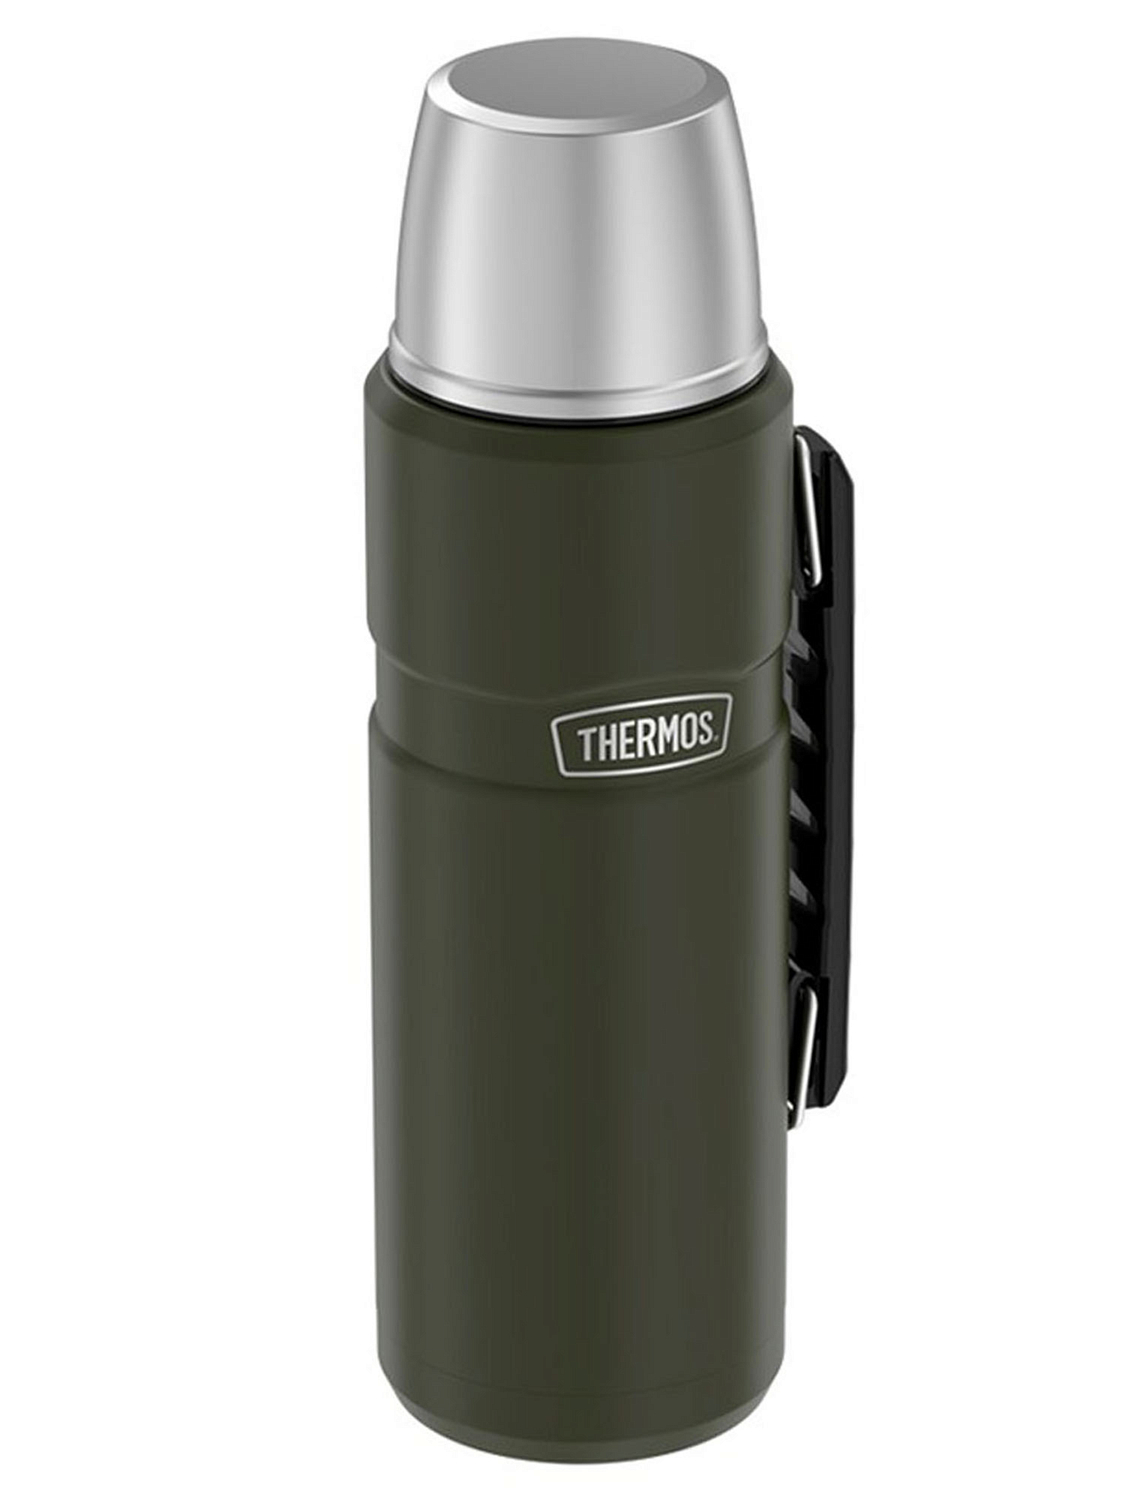 Термос Thermos SK2010 AG 1,2L Хаки